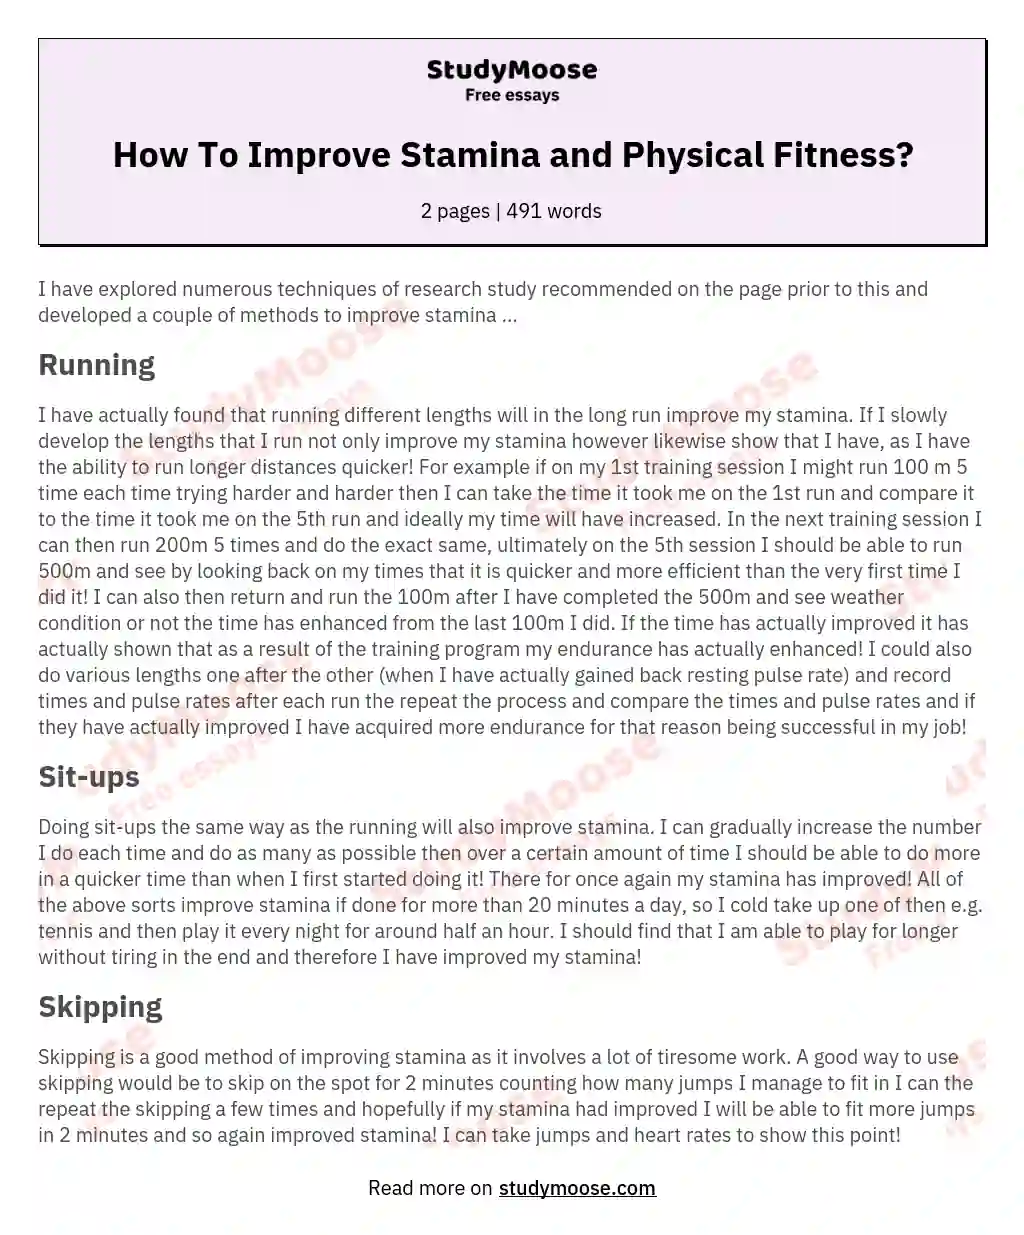 How To Improve Stamina and Physical Fitness?